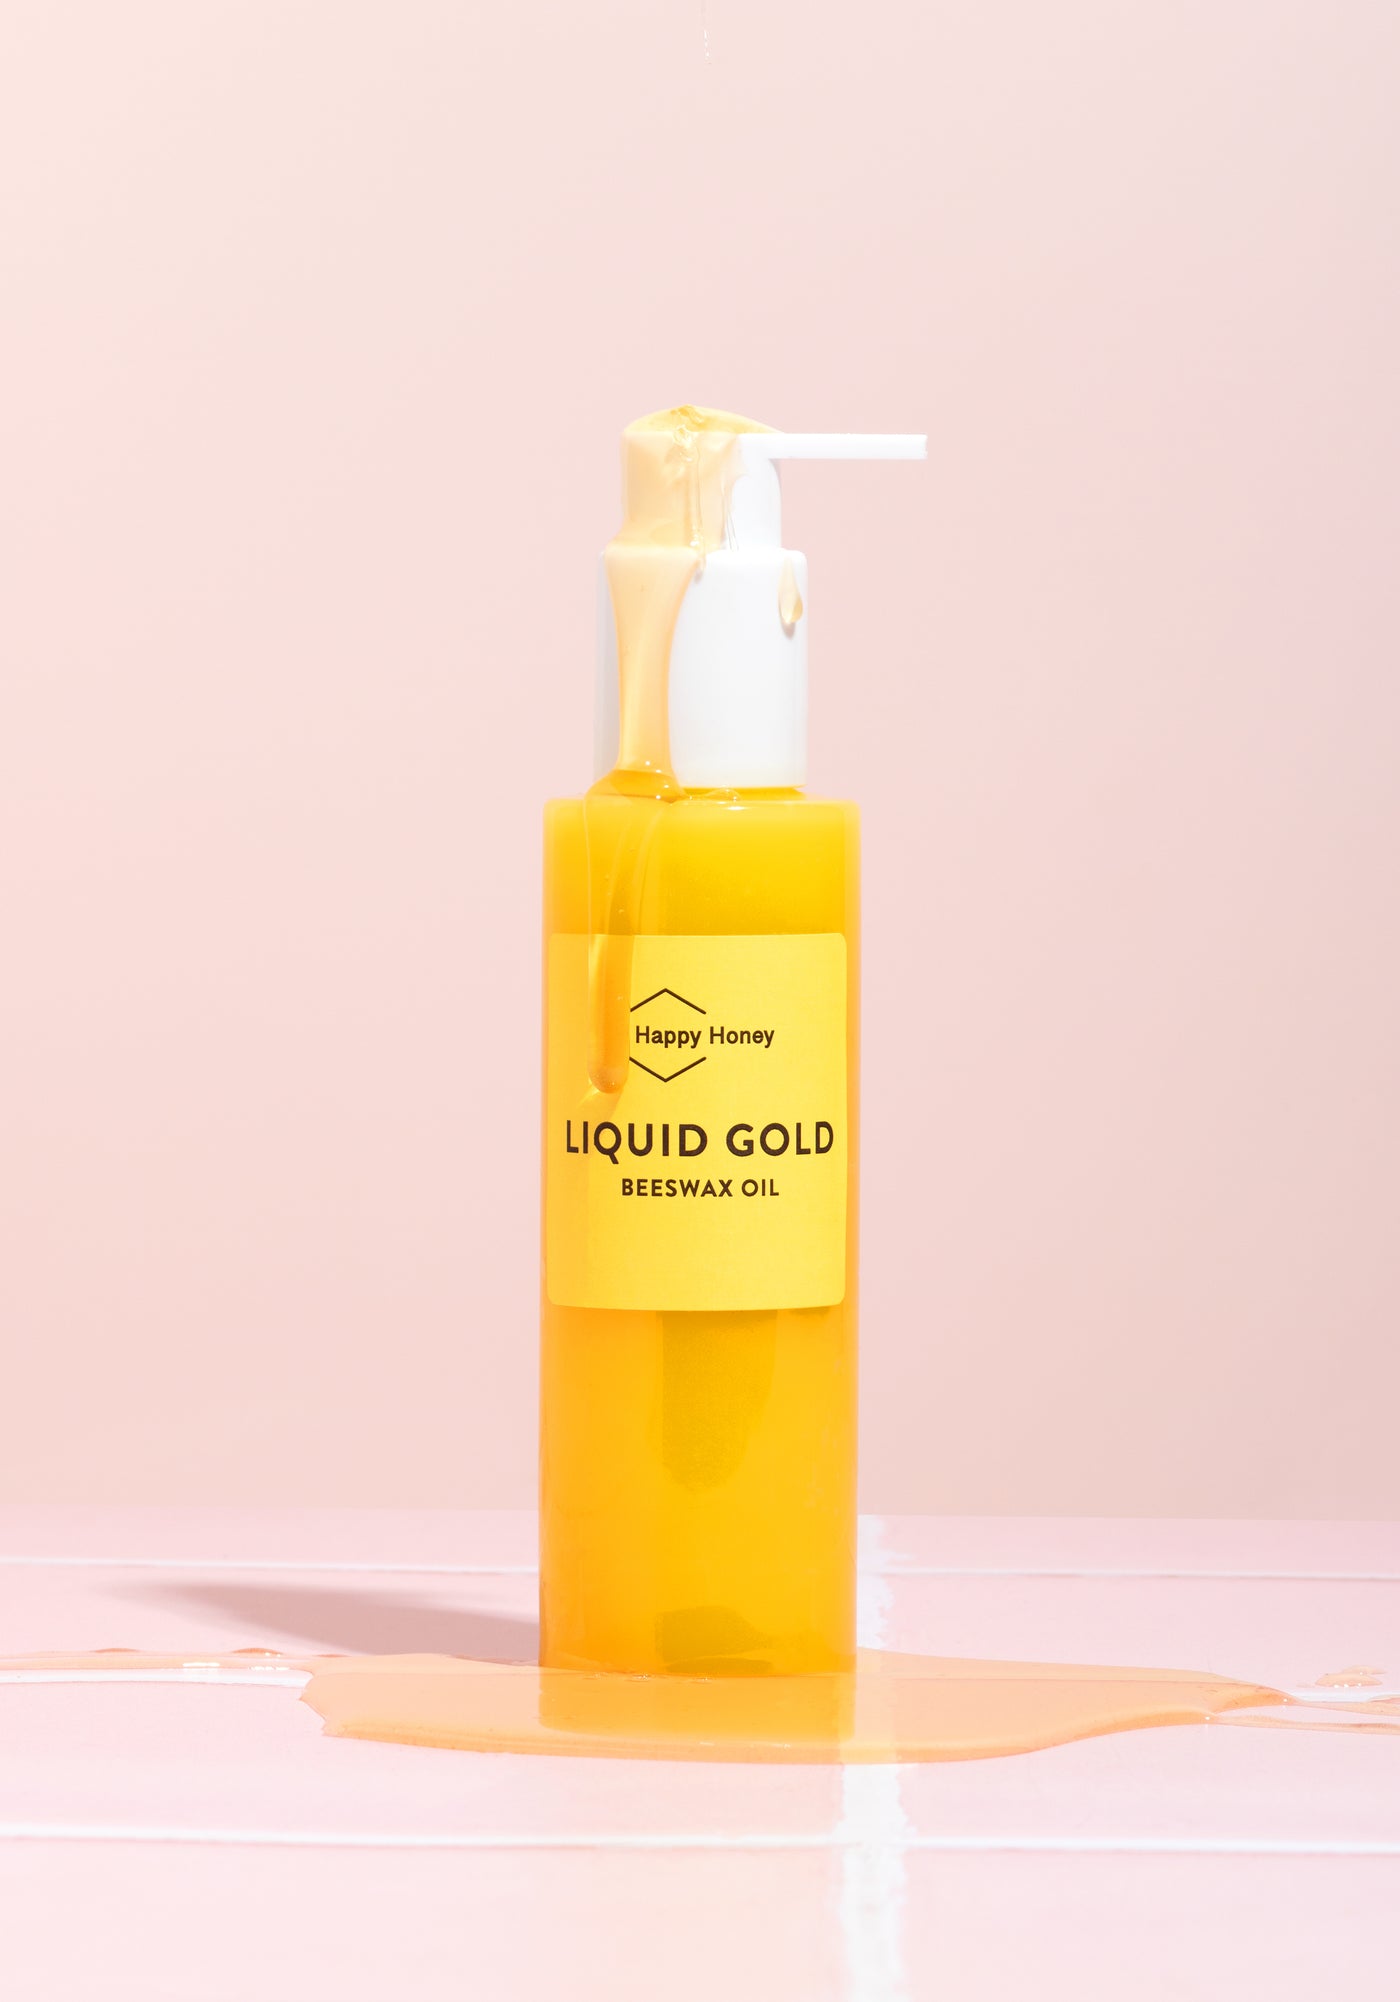 Liquid Gold Beeswaxoil Dogcare